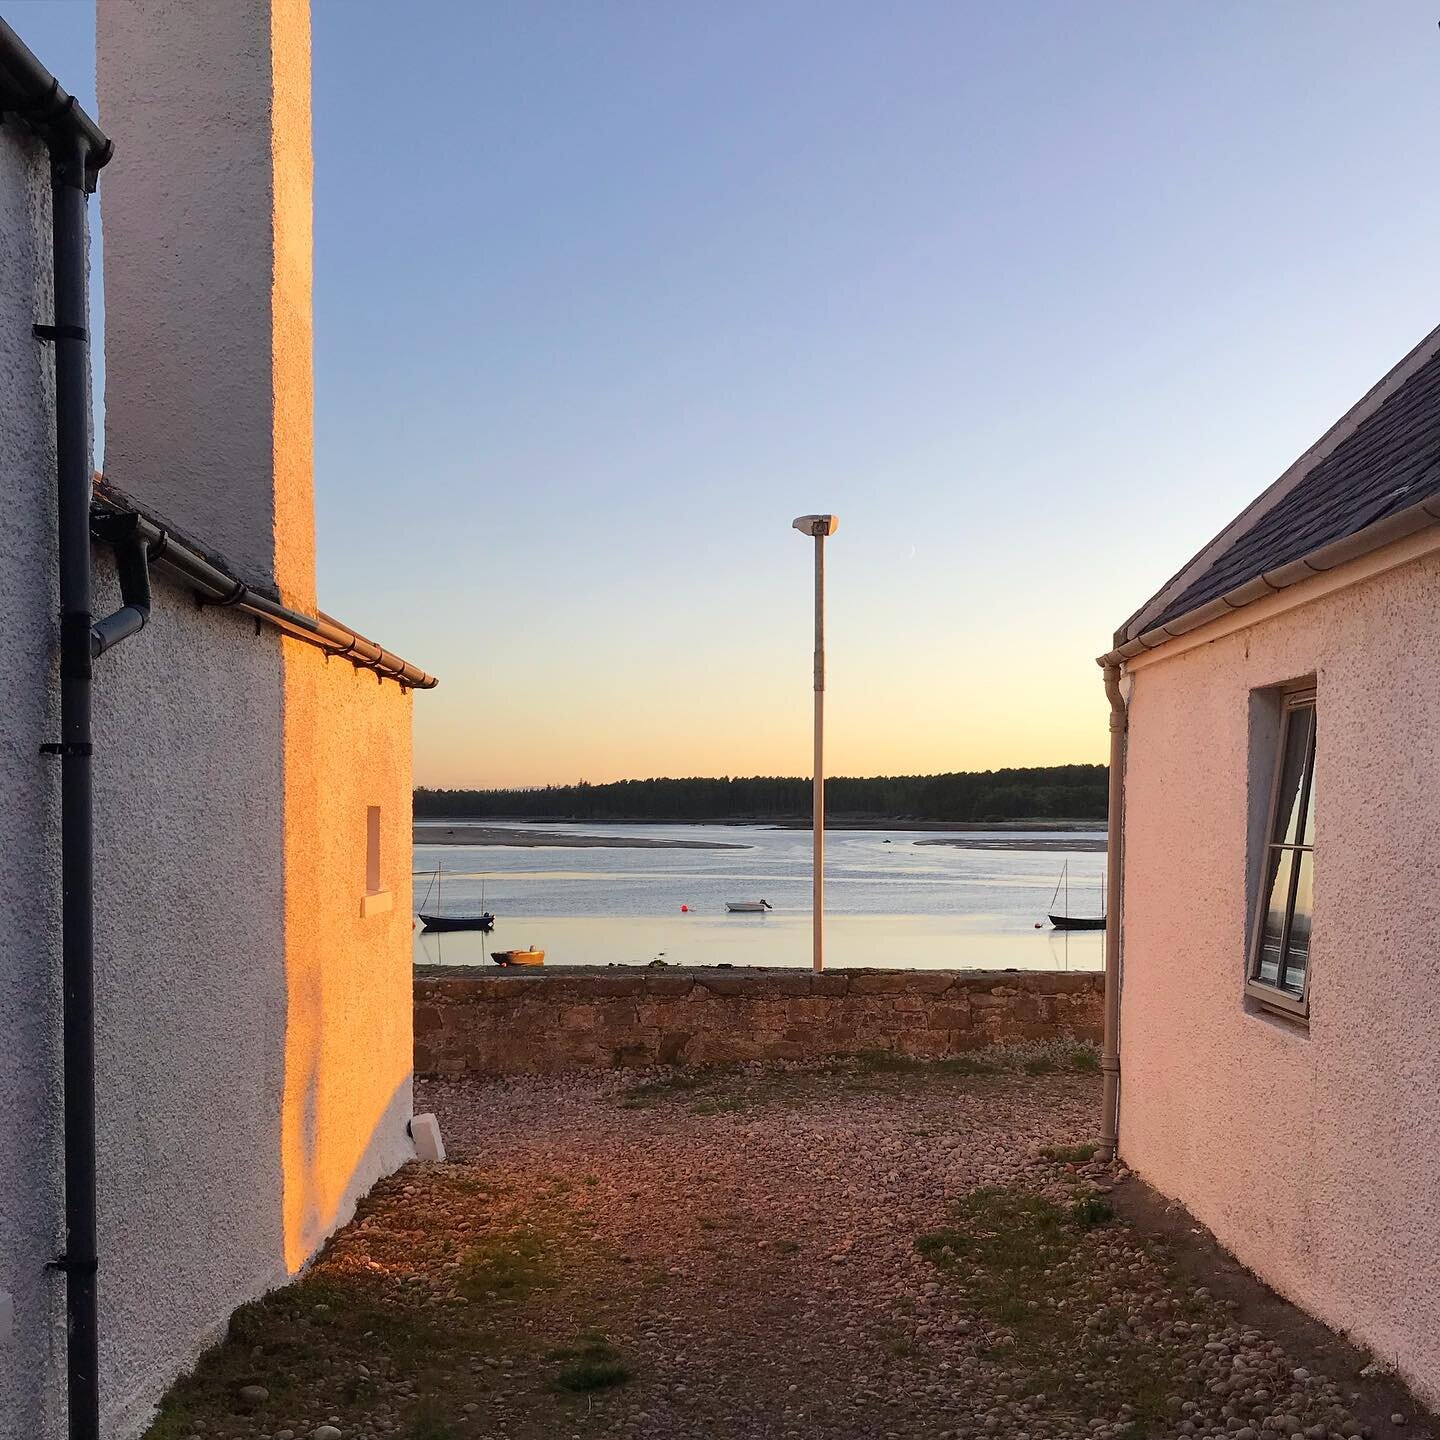 Gorgeous late summer sunset skies this eve over Findhorn Bay. As the #saunabuild is getting closer to completion, we&rsquo;ve been scouting out options for locations to park her up around the village for pop-up community sauna sessions 🔥📍#watchthis